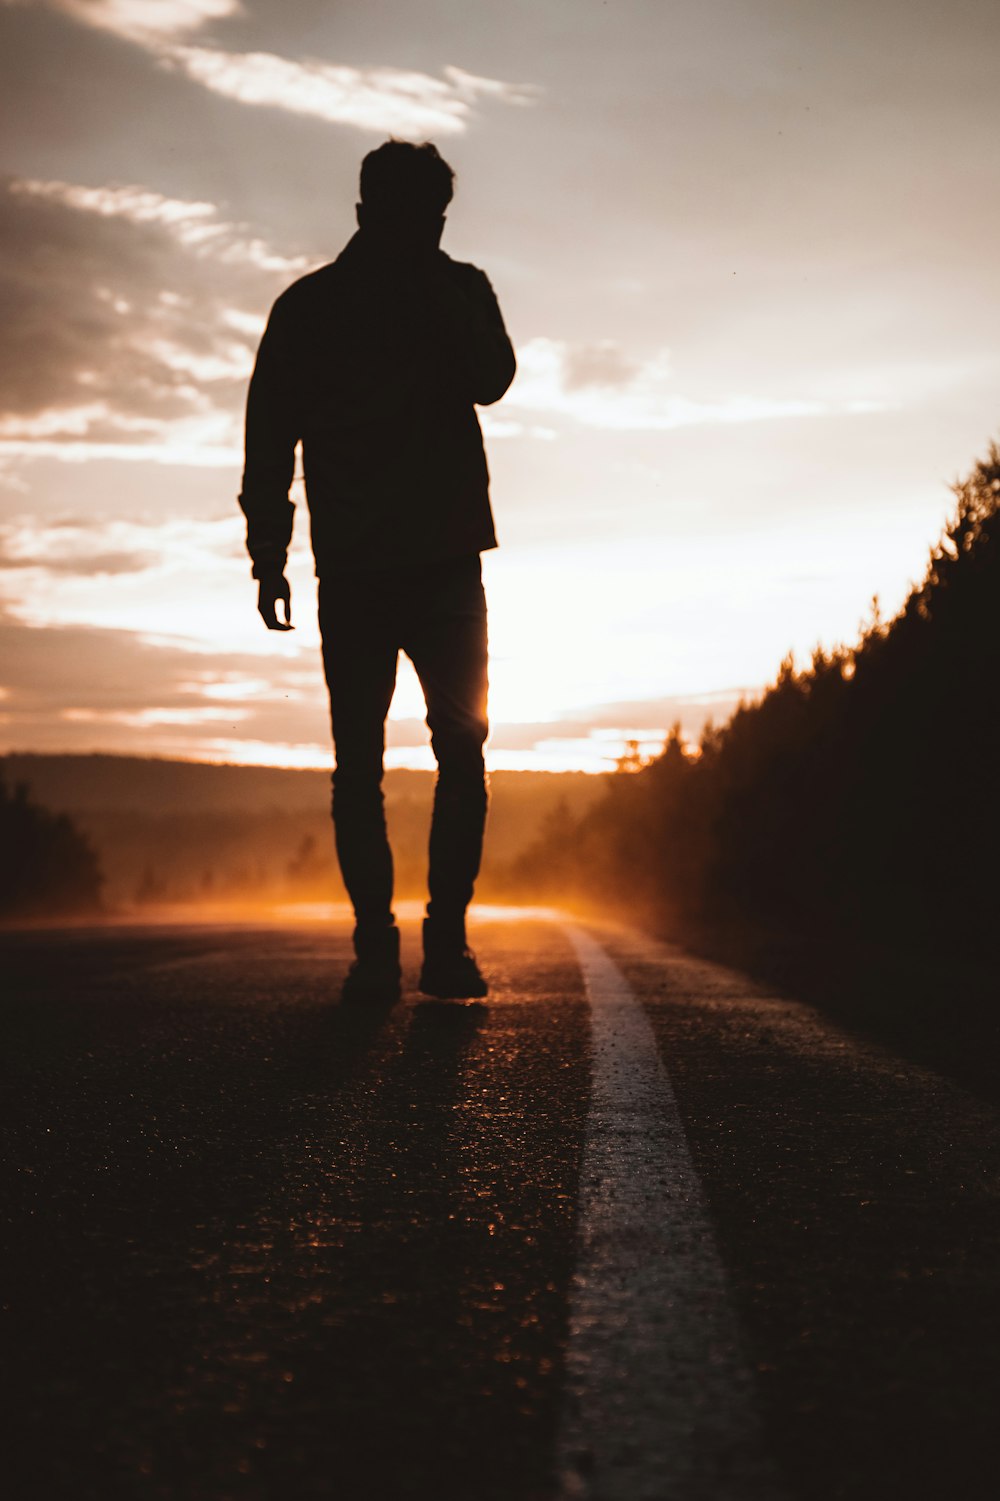 silhouette of person standing on road during sunset